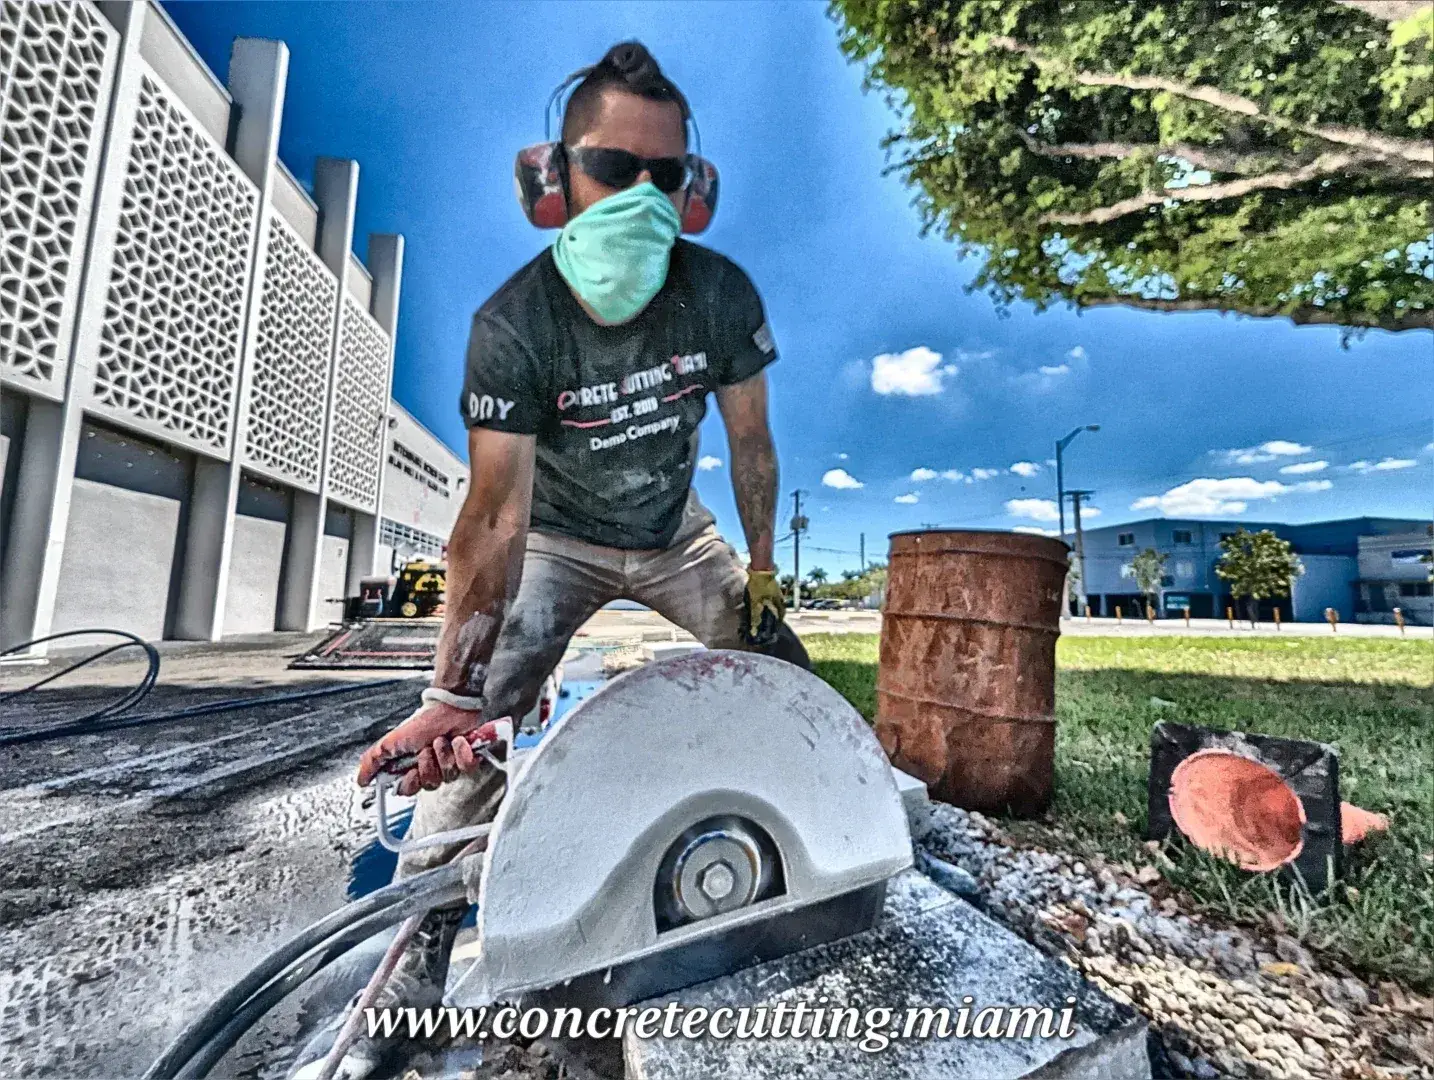 What is Concrete Cutting?